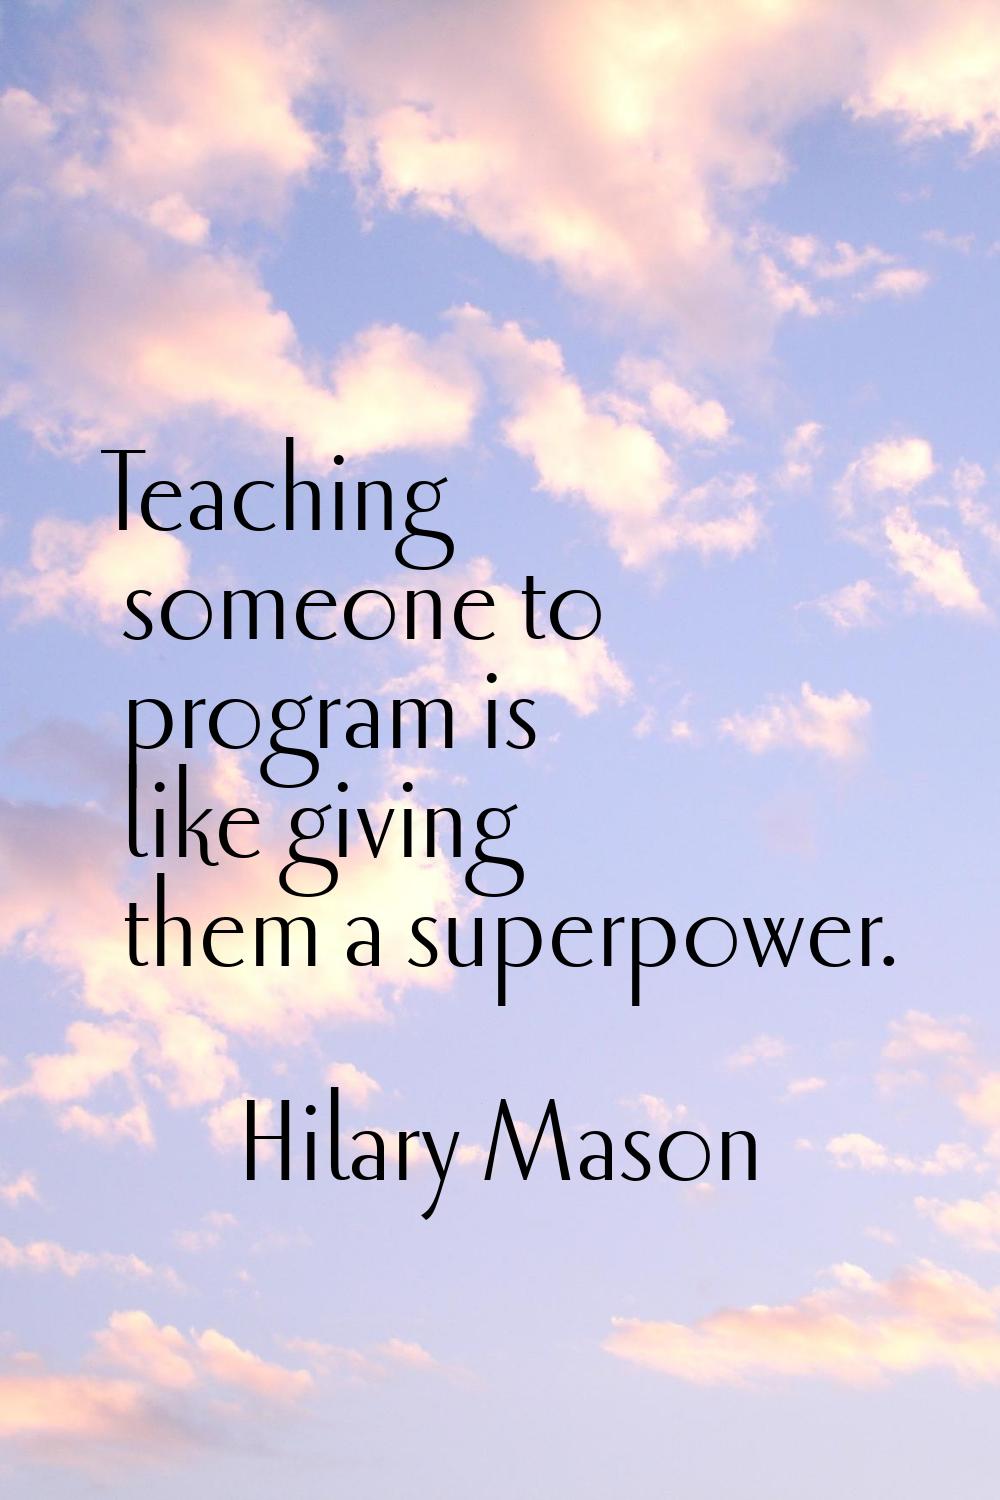 Teaching someone to program is like giving them a superpower.